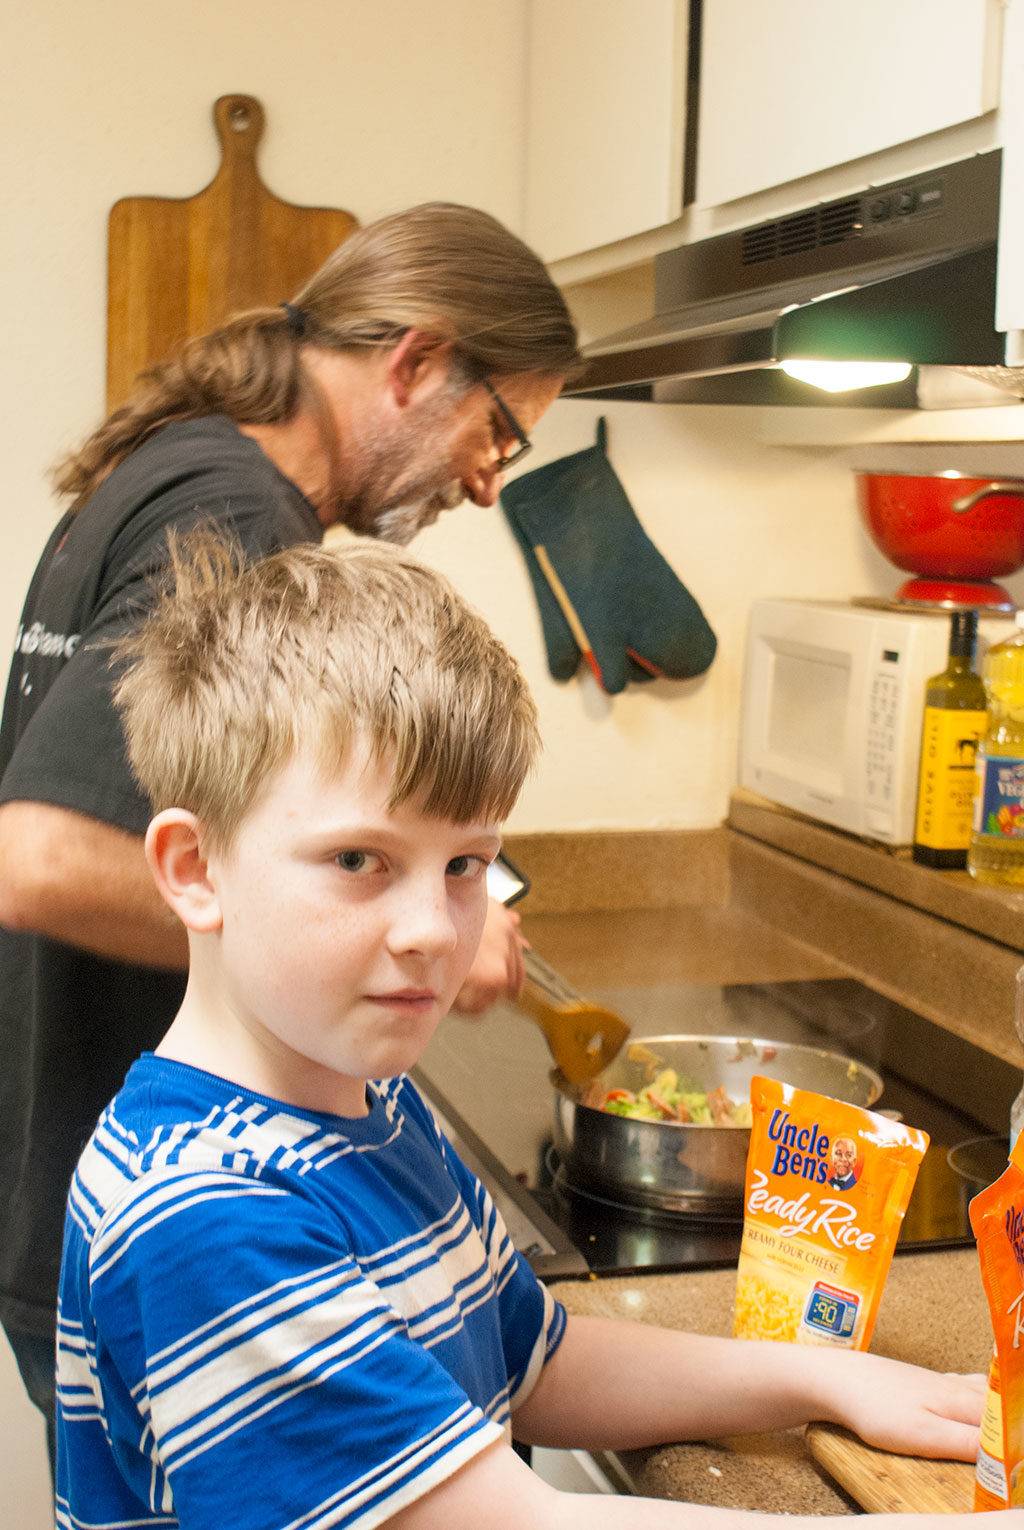 Almost time to add the Uncle Ben's Rice @UncleBens #BensBeginners #UncleBensPromo [ad]